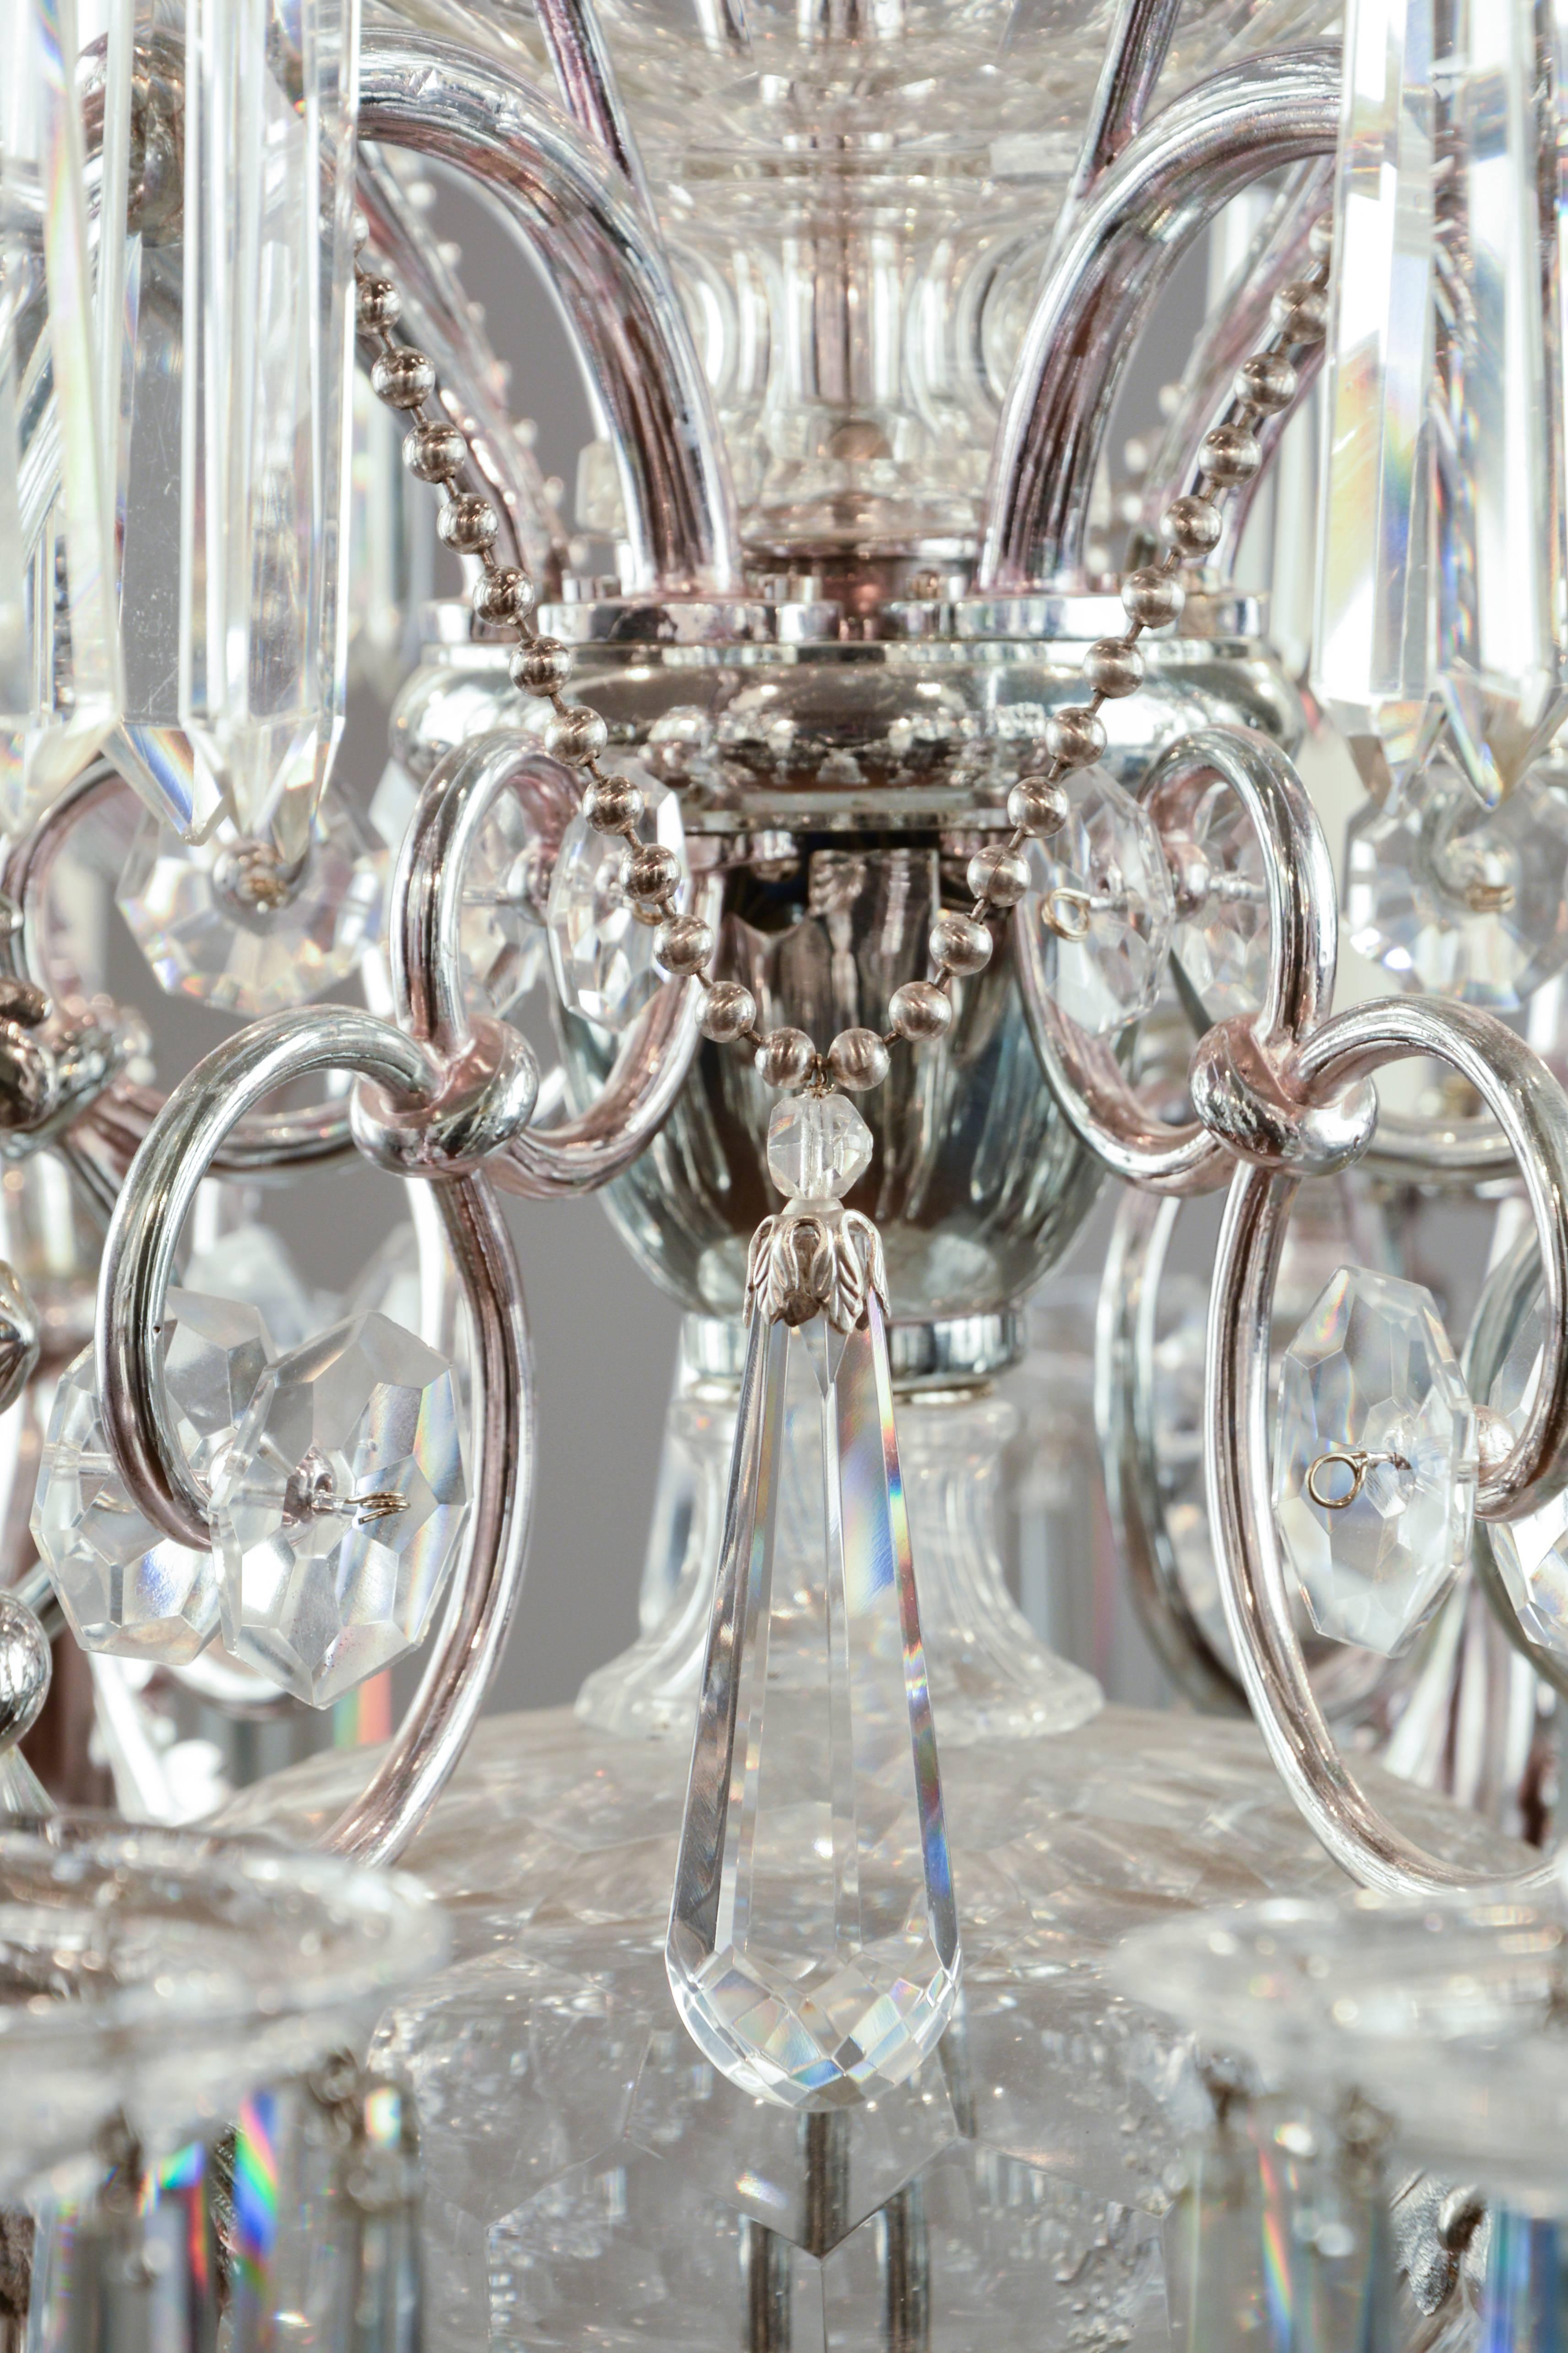 Typical Lobmeyr chandelier from circa 1880 for 18 candle bulbs.
Elaborate brass frame with lovingly refined cast applications. Masterly cut and polished crystal parts along column. The drop catchers are of the Lobmeyr signature type with the